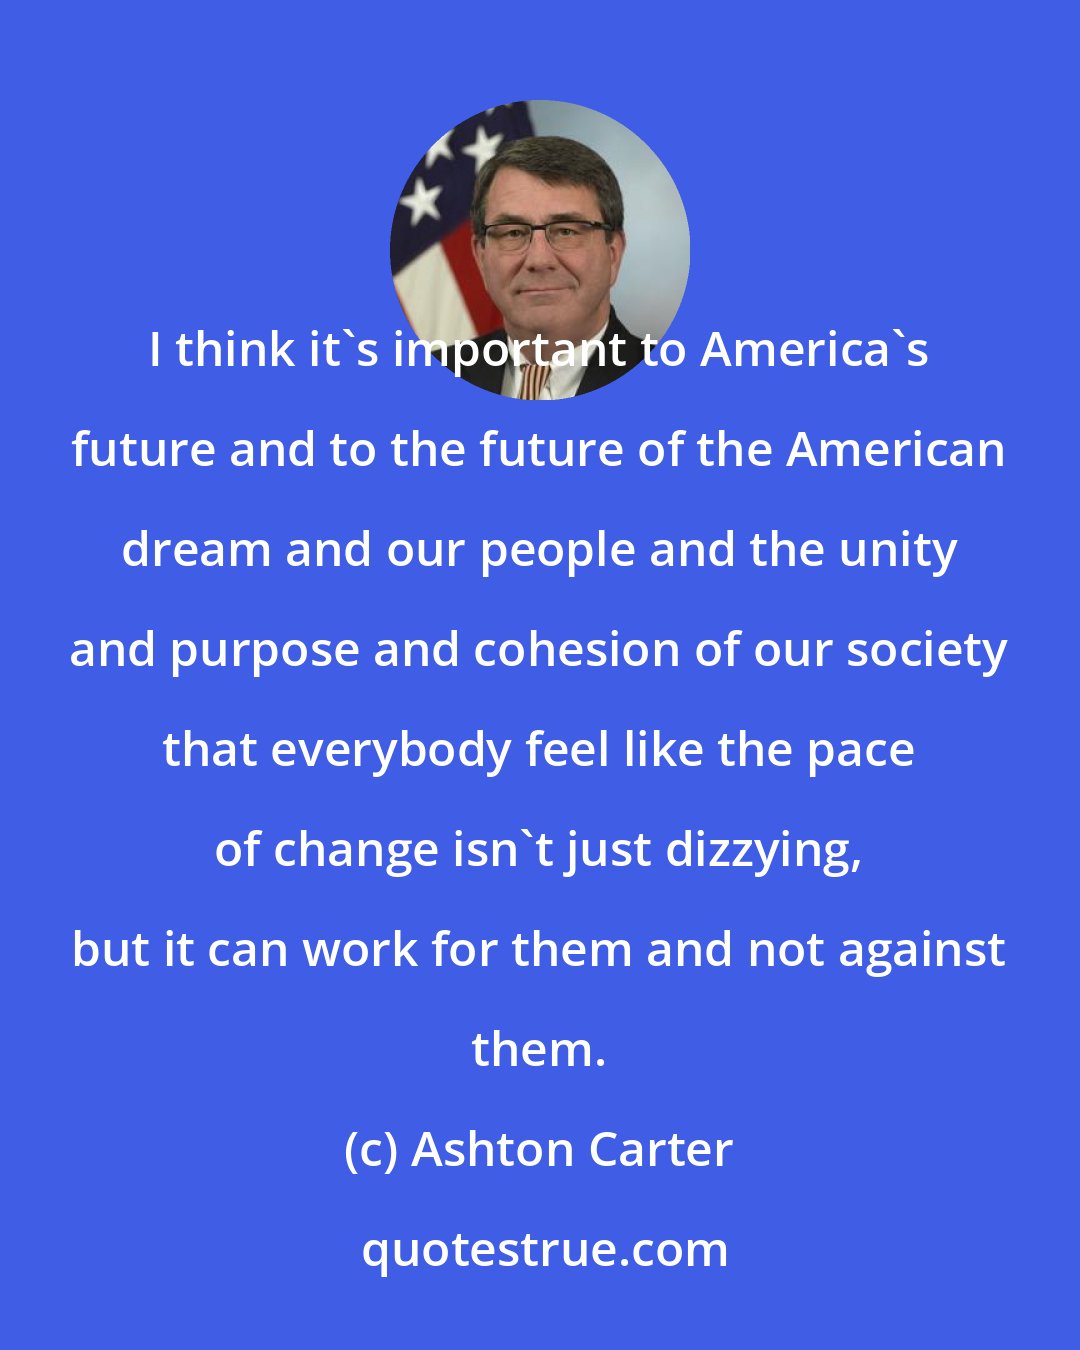 Ashton Carter: I think it's important to America's future and to the future of the American dream and our people and the unity and purpose and cohesion of our society that everybody feel like the pace of change isn't just dizzying, but it can work for them and not against them.